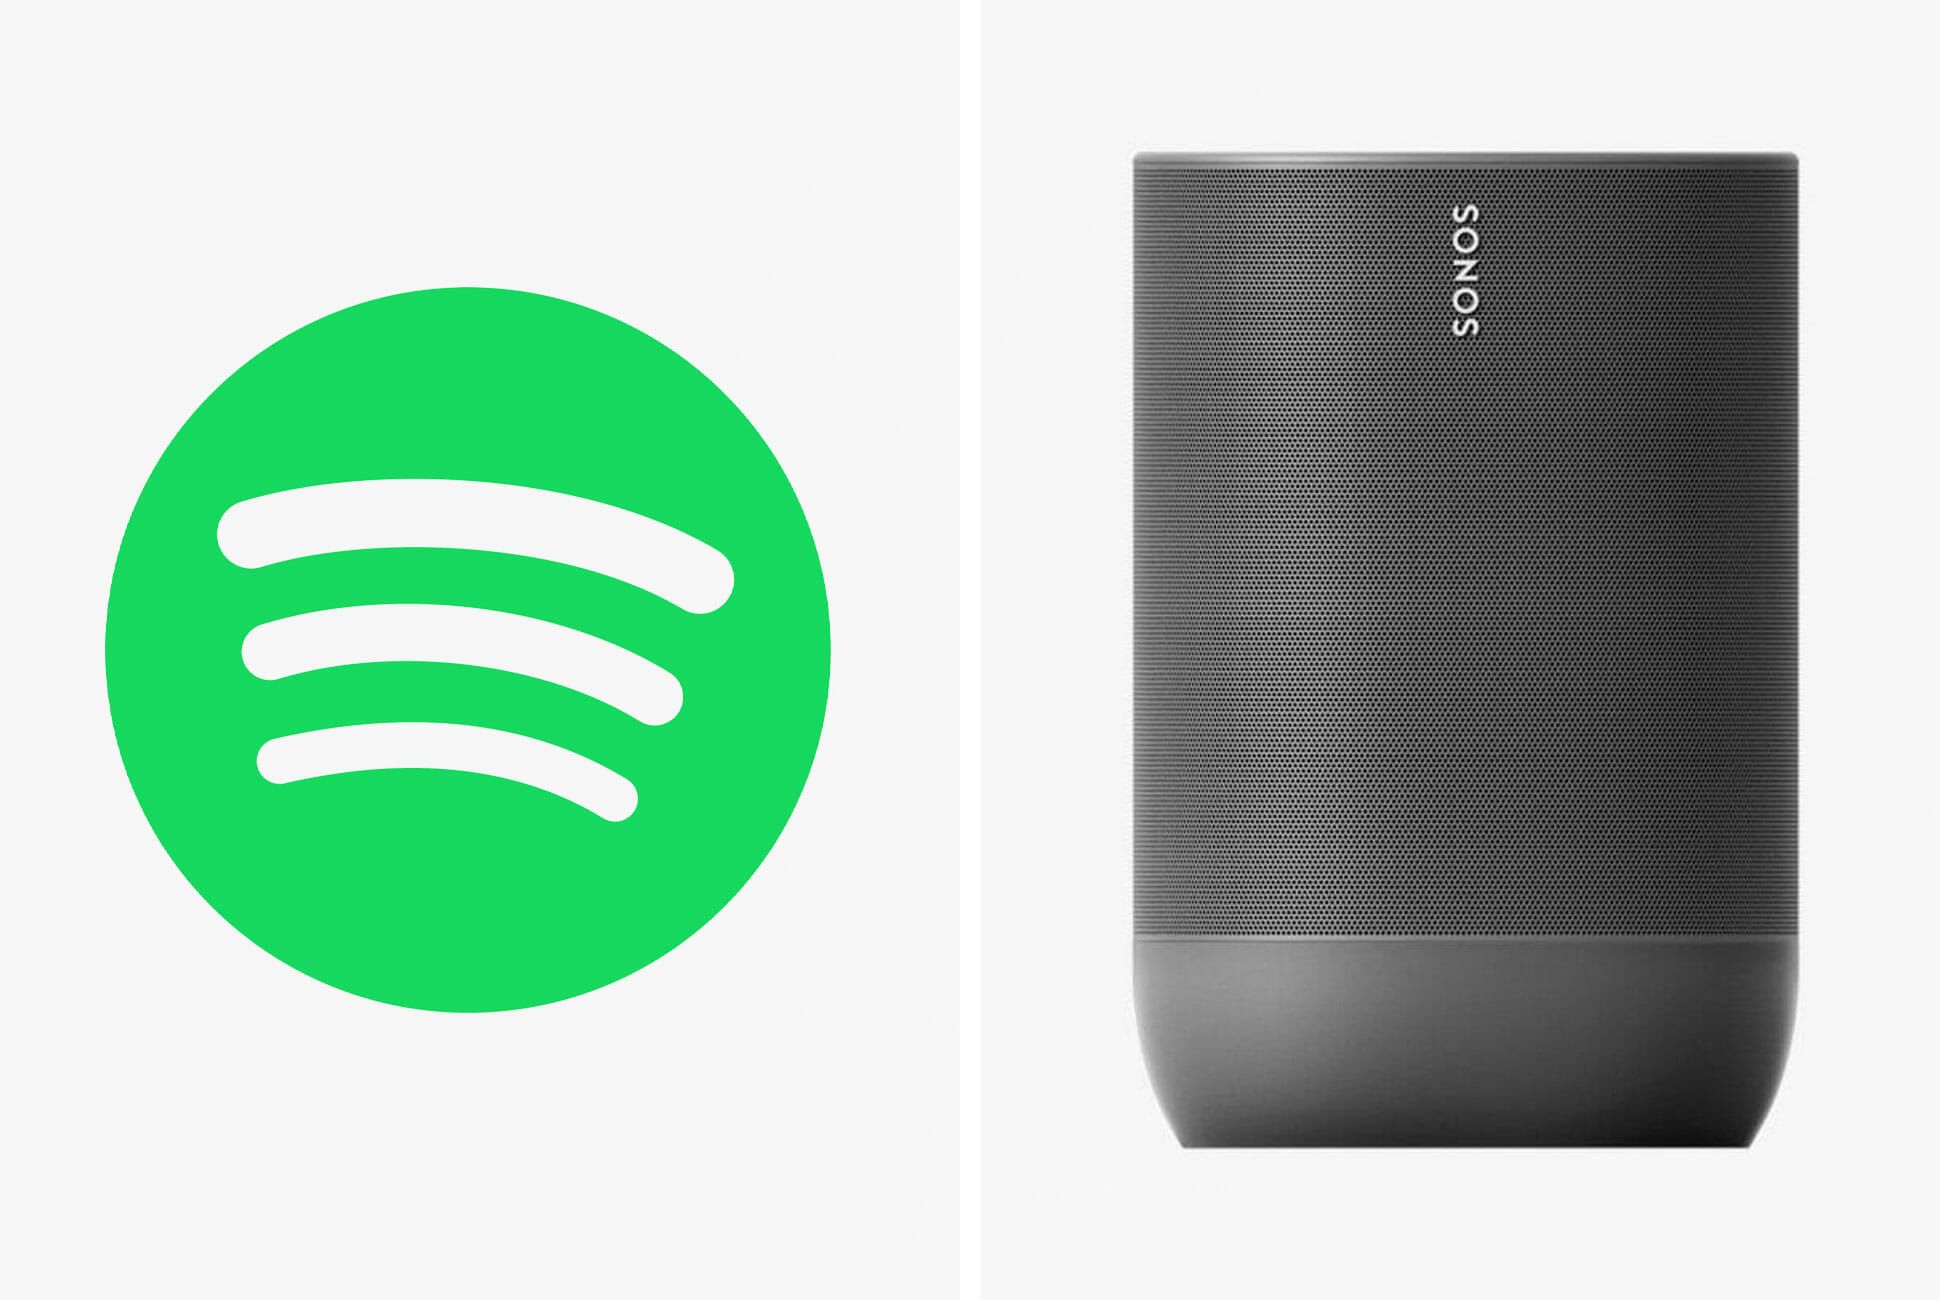 This Is the Big Sonos Update that Spotify Listeners Have Been Waiting For